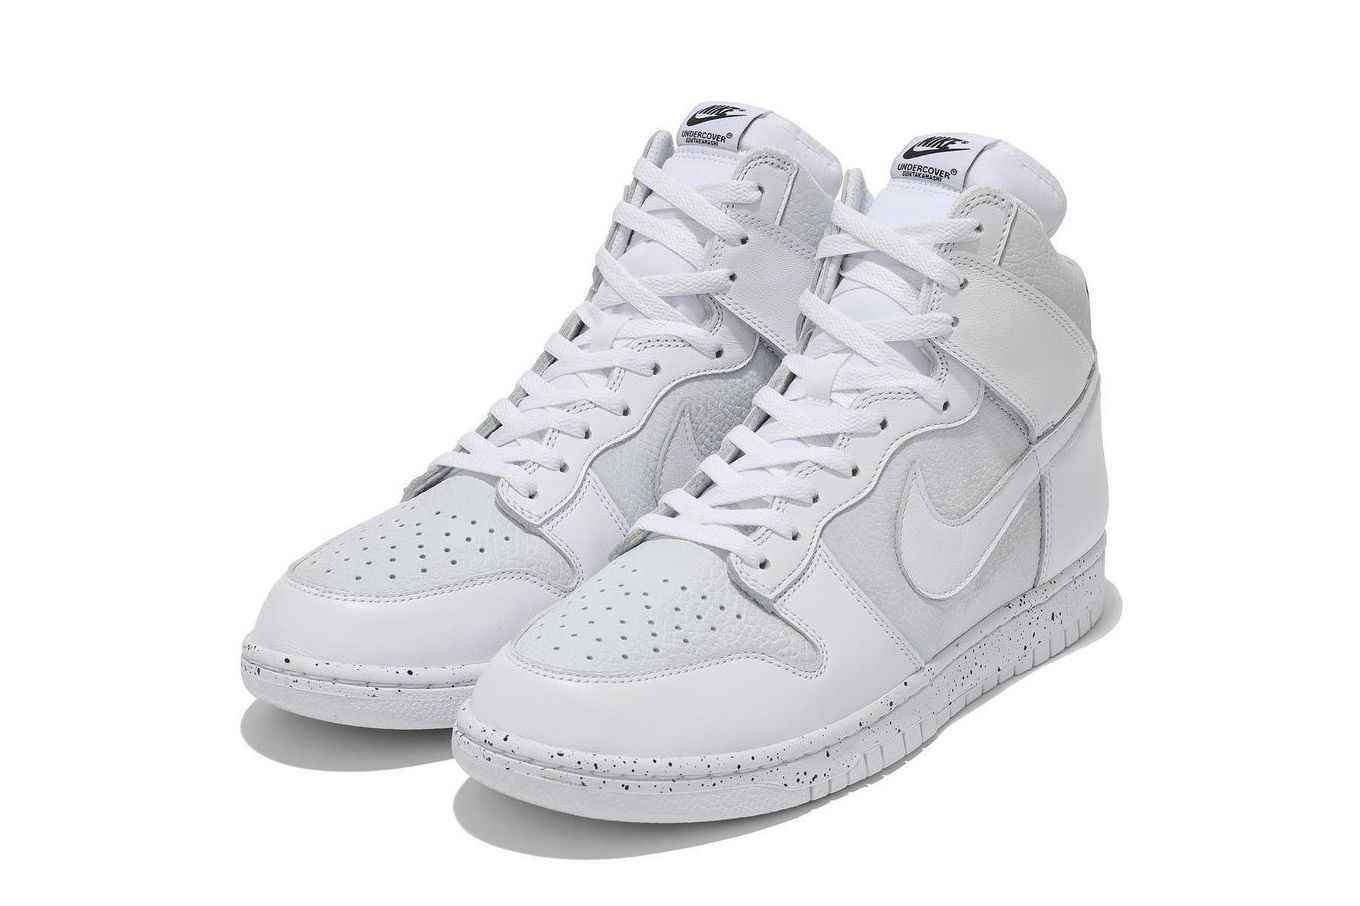 The UNDERCOVER x Nike Dunk High 1985 Appears In White - Sneaker 